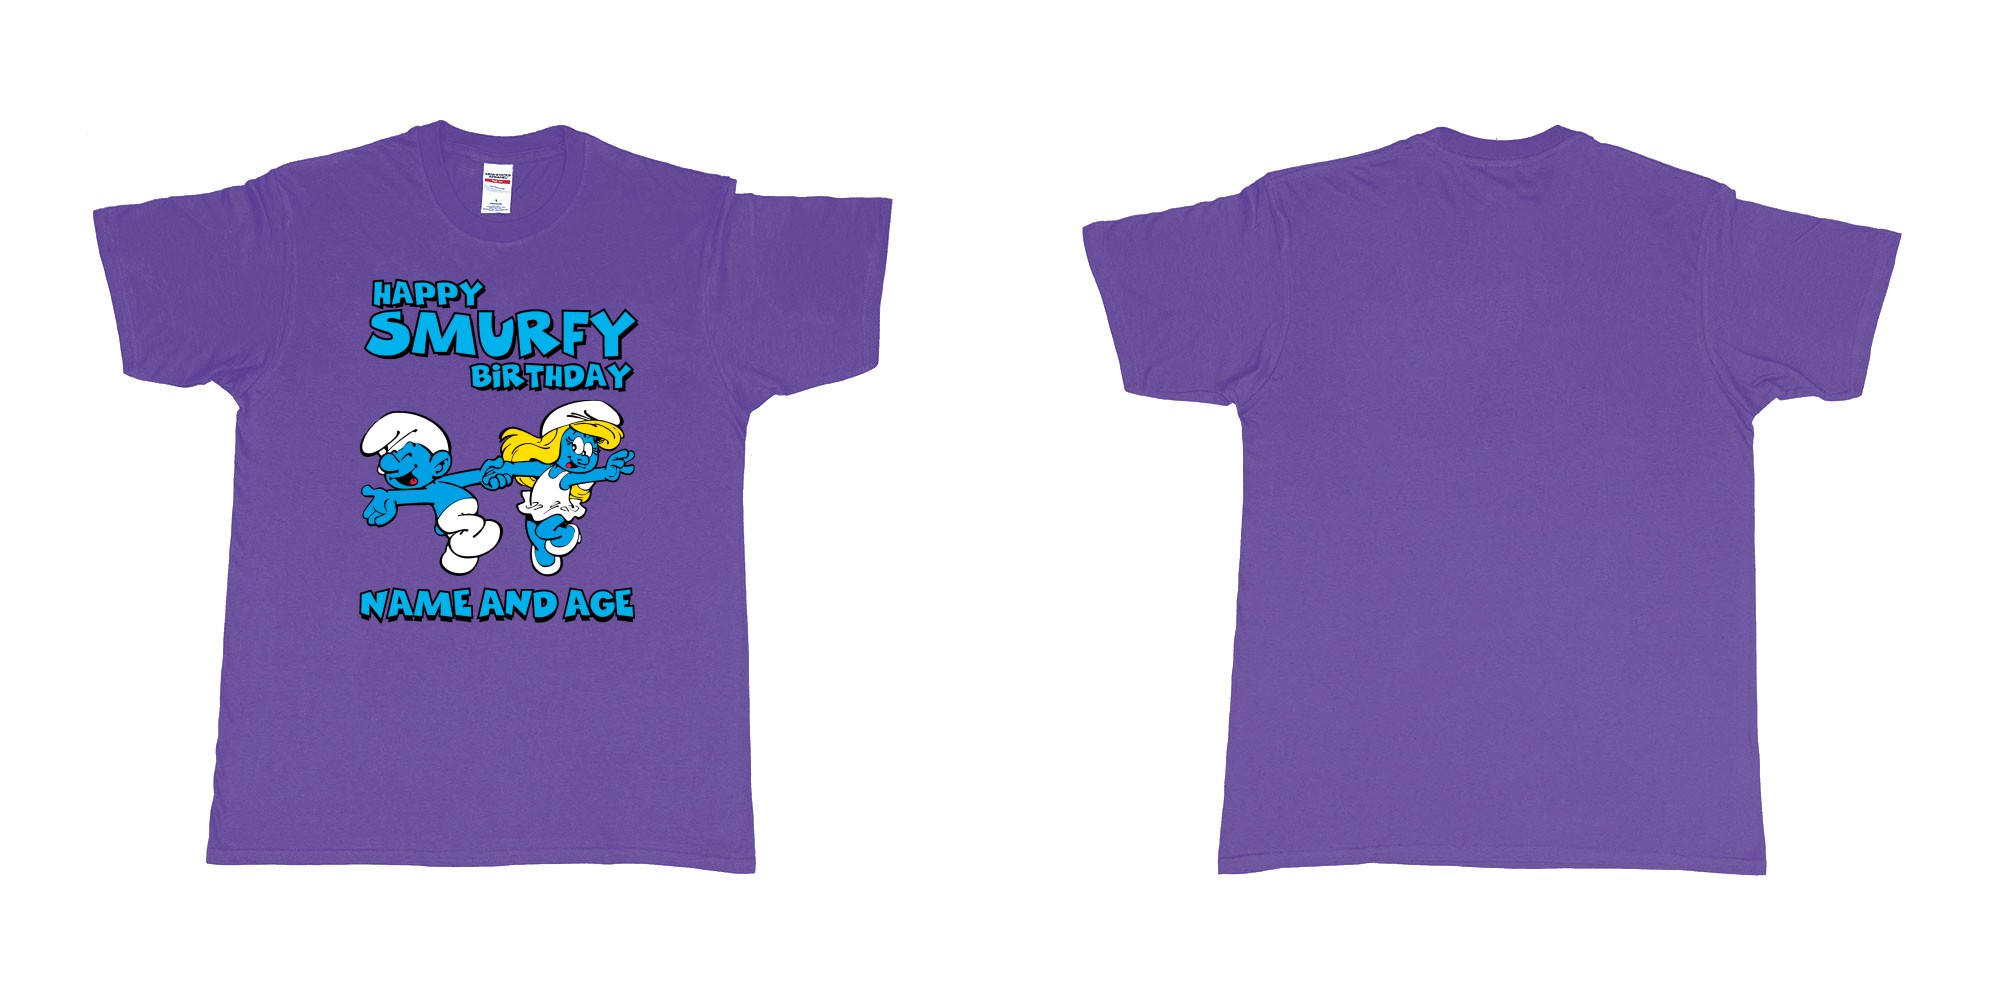 Custom tshirt design happy smurfy birthday in fabric color purple choice your own text made in Bali by The Pirate Way